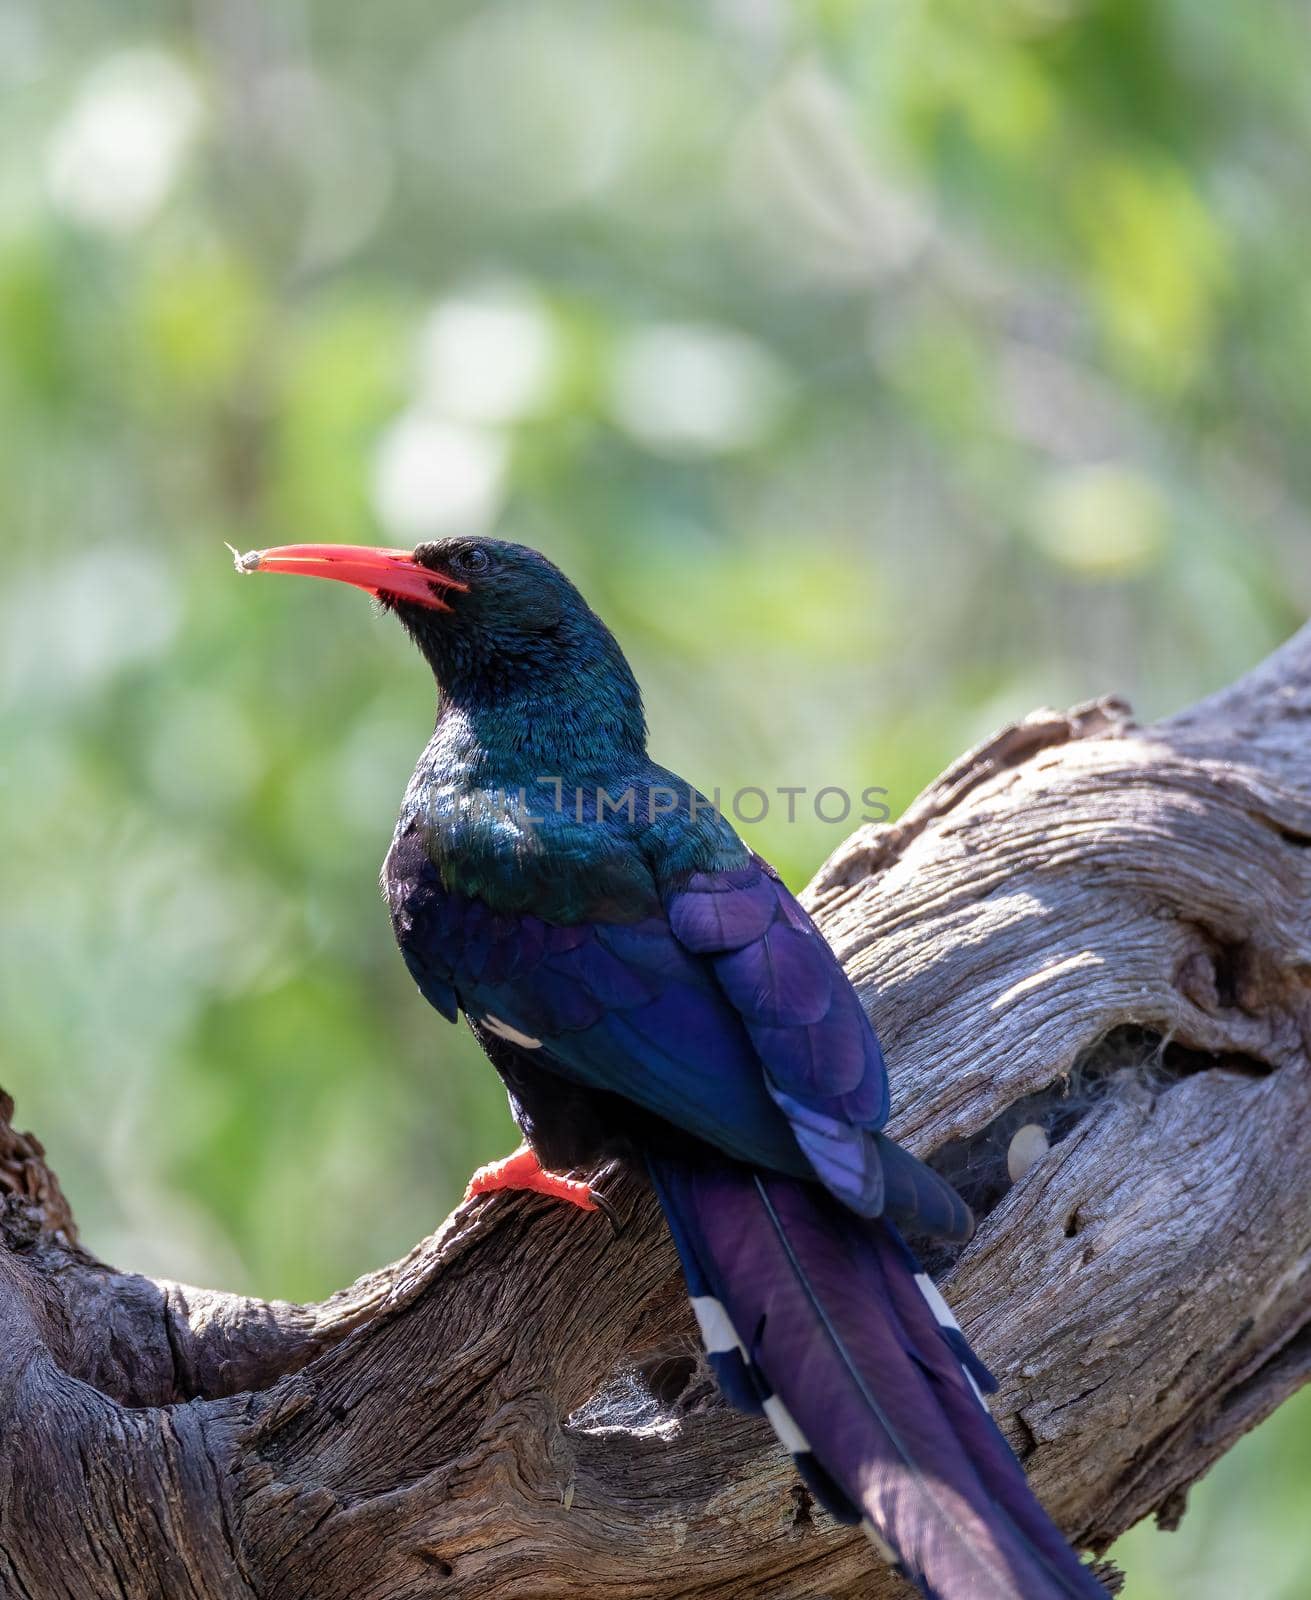 Green Wood hoopoe, Phoeniculus purpureus also known as redbilled hoopoe makes cackling sound and are in black in color with green patches. Bwabwata Namibia Africa wildlife